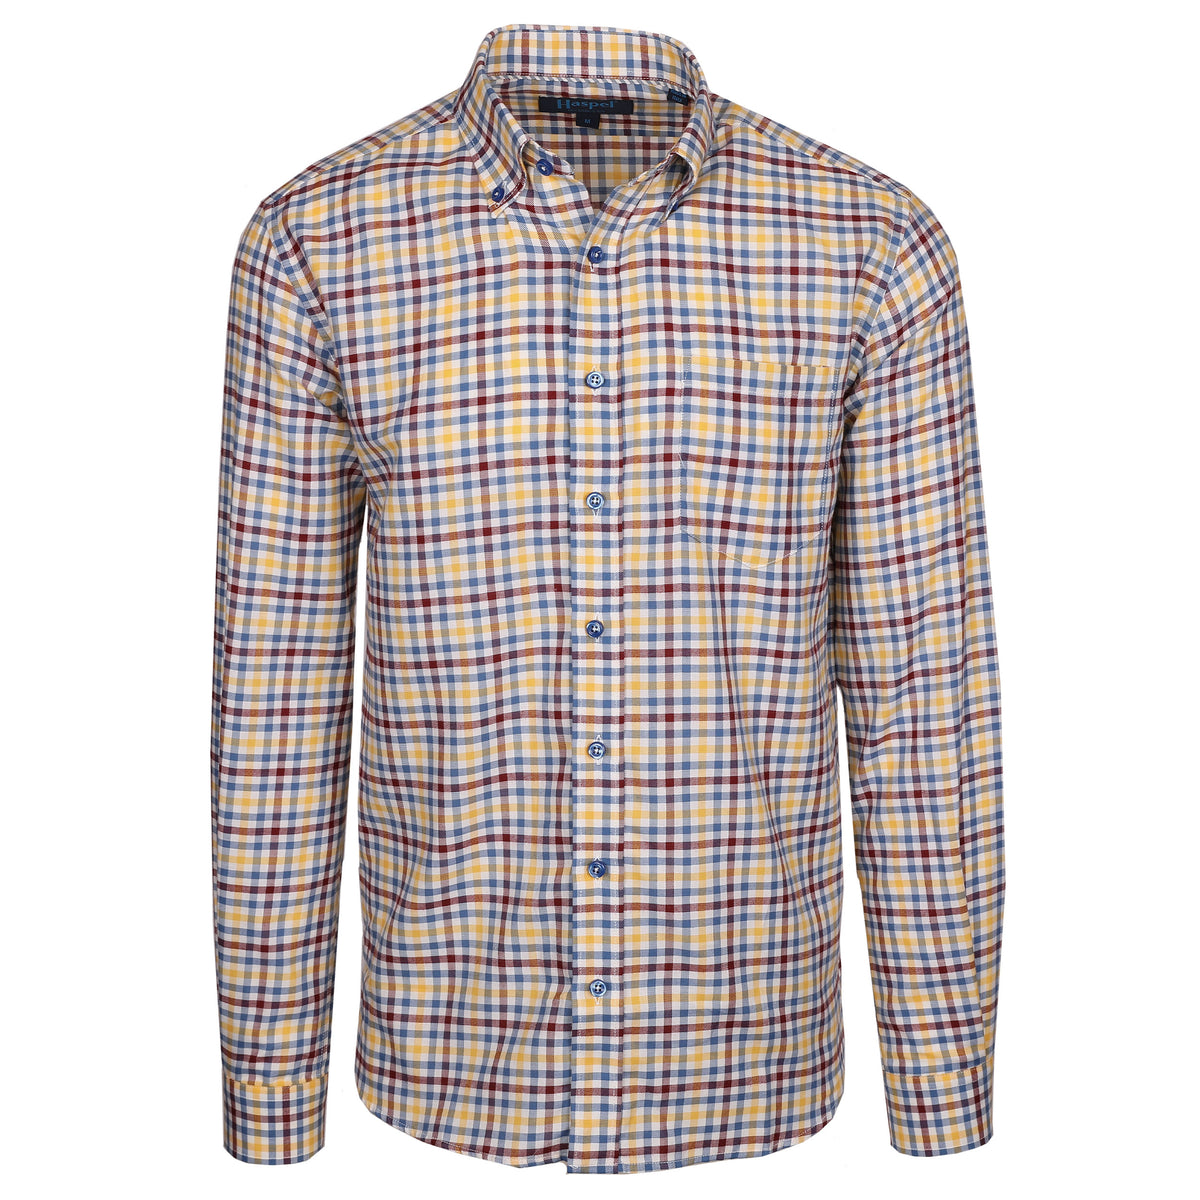 Keep cool in the Franklin Yellow, Blue &amp; Burgundy Brushed Plaid shirt. Crafted with a yellow, blue, and burgundy brushed plaid, this stylish shirt delivers breathability and comfort. Beat the New Orleans heat in this cozy style!  100% Cotton • Short Sleeve • Button Down Collar • No Chest Pocket • Machine Wash • Made in Italy • Return Policy